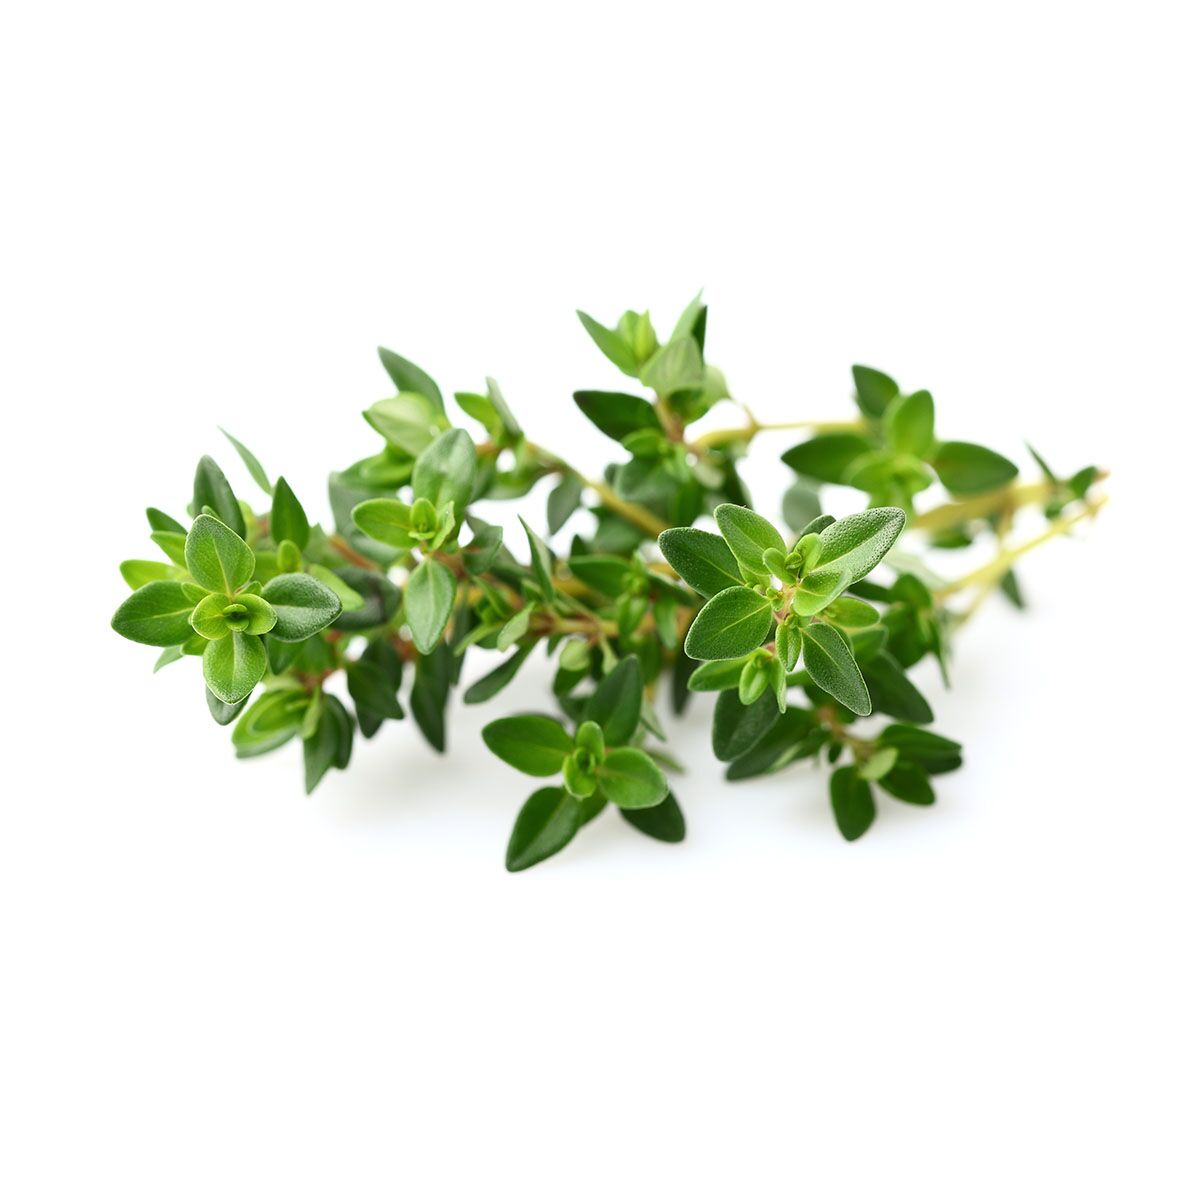 Thyme_plant_1200x1200_preview.jpg